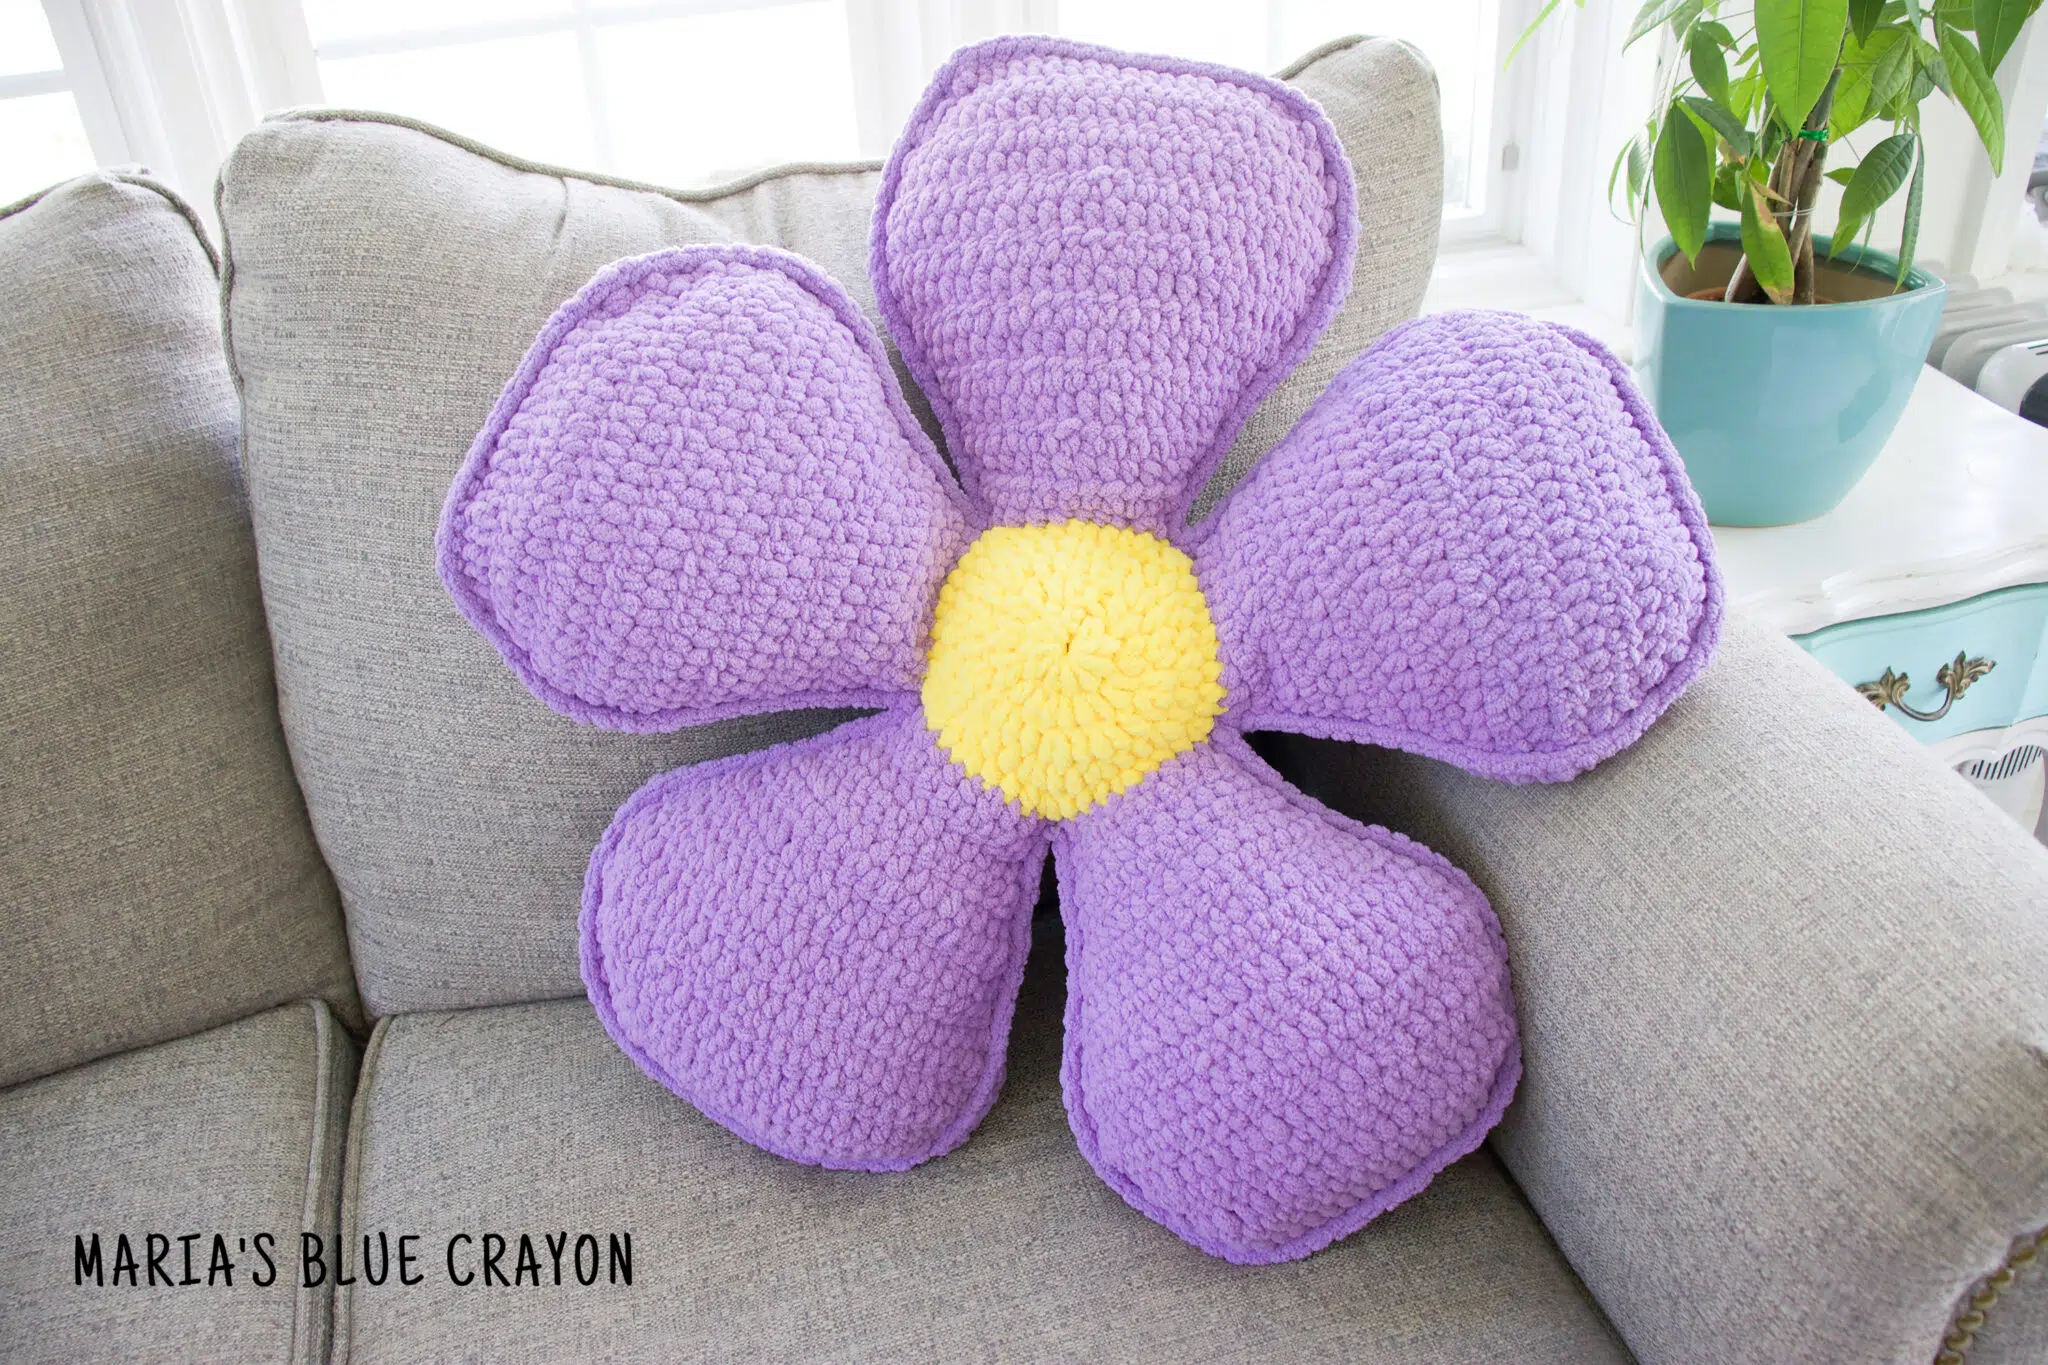 Crochet flower pillow in purple and yellow